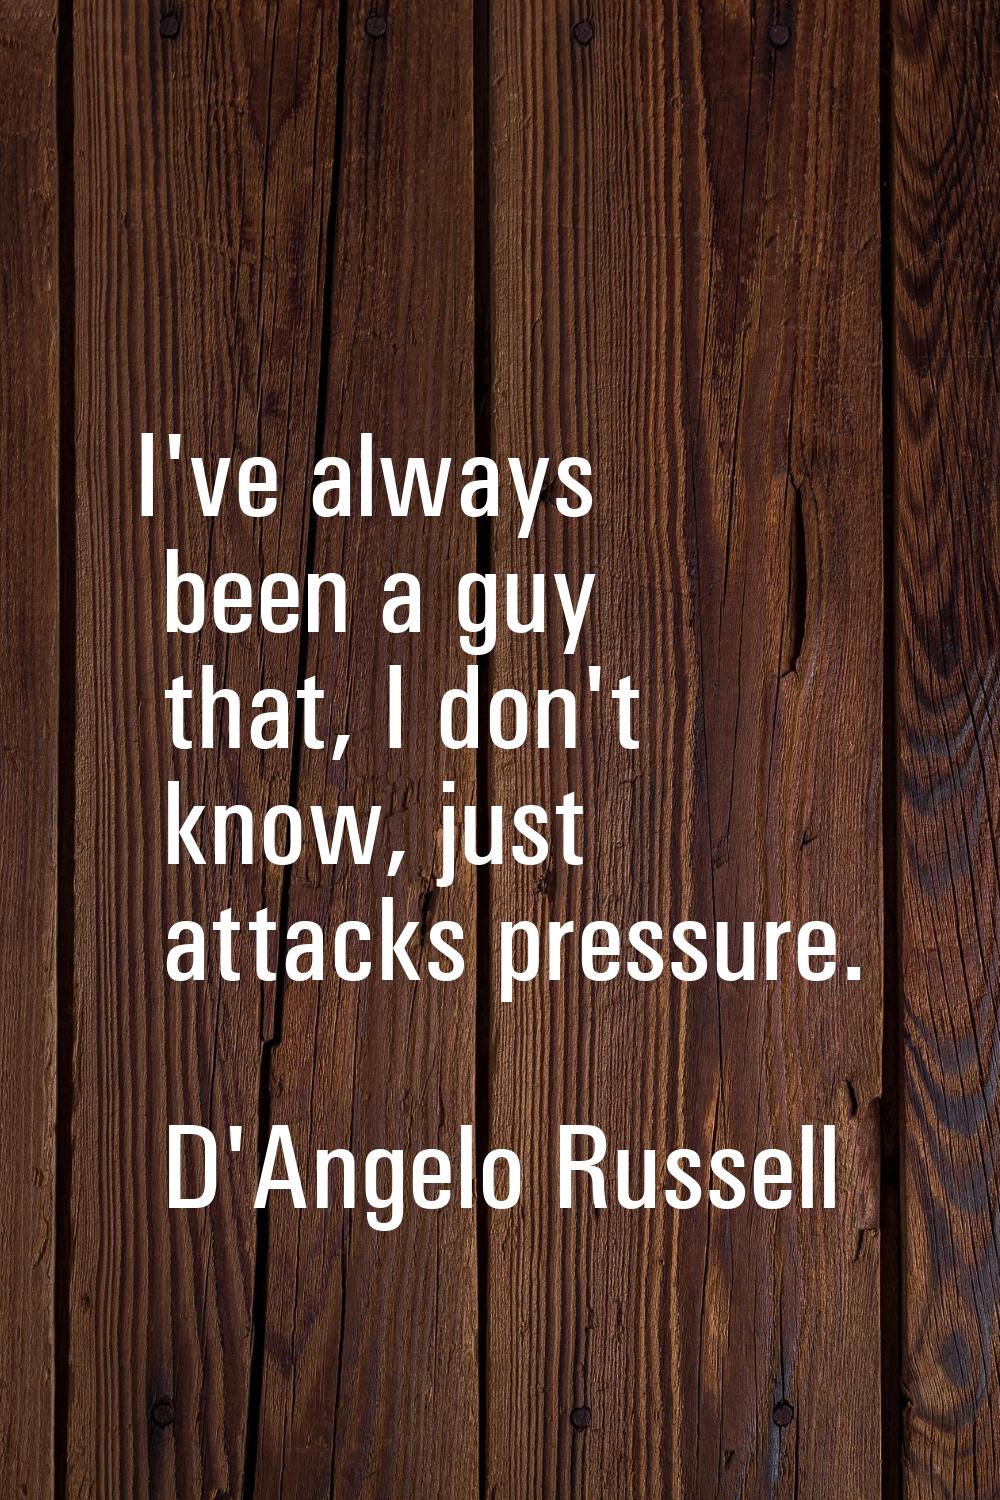 I've always been a guy that, I don't know, just attacks pressure.